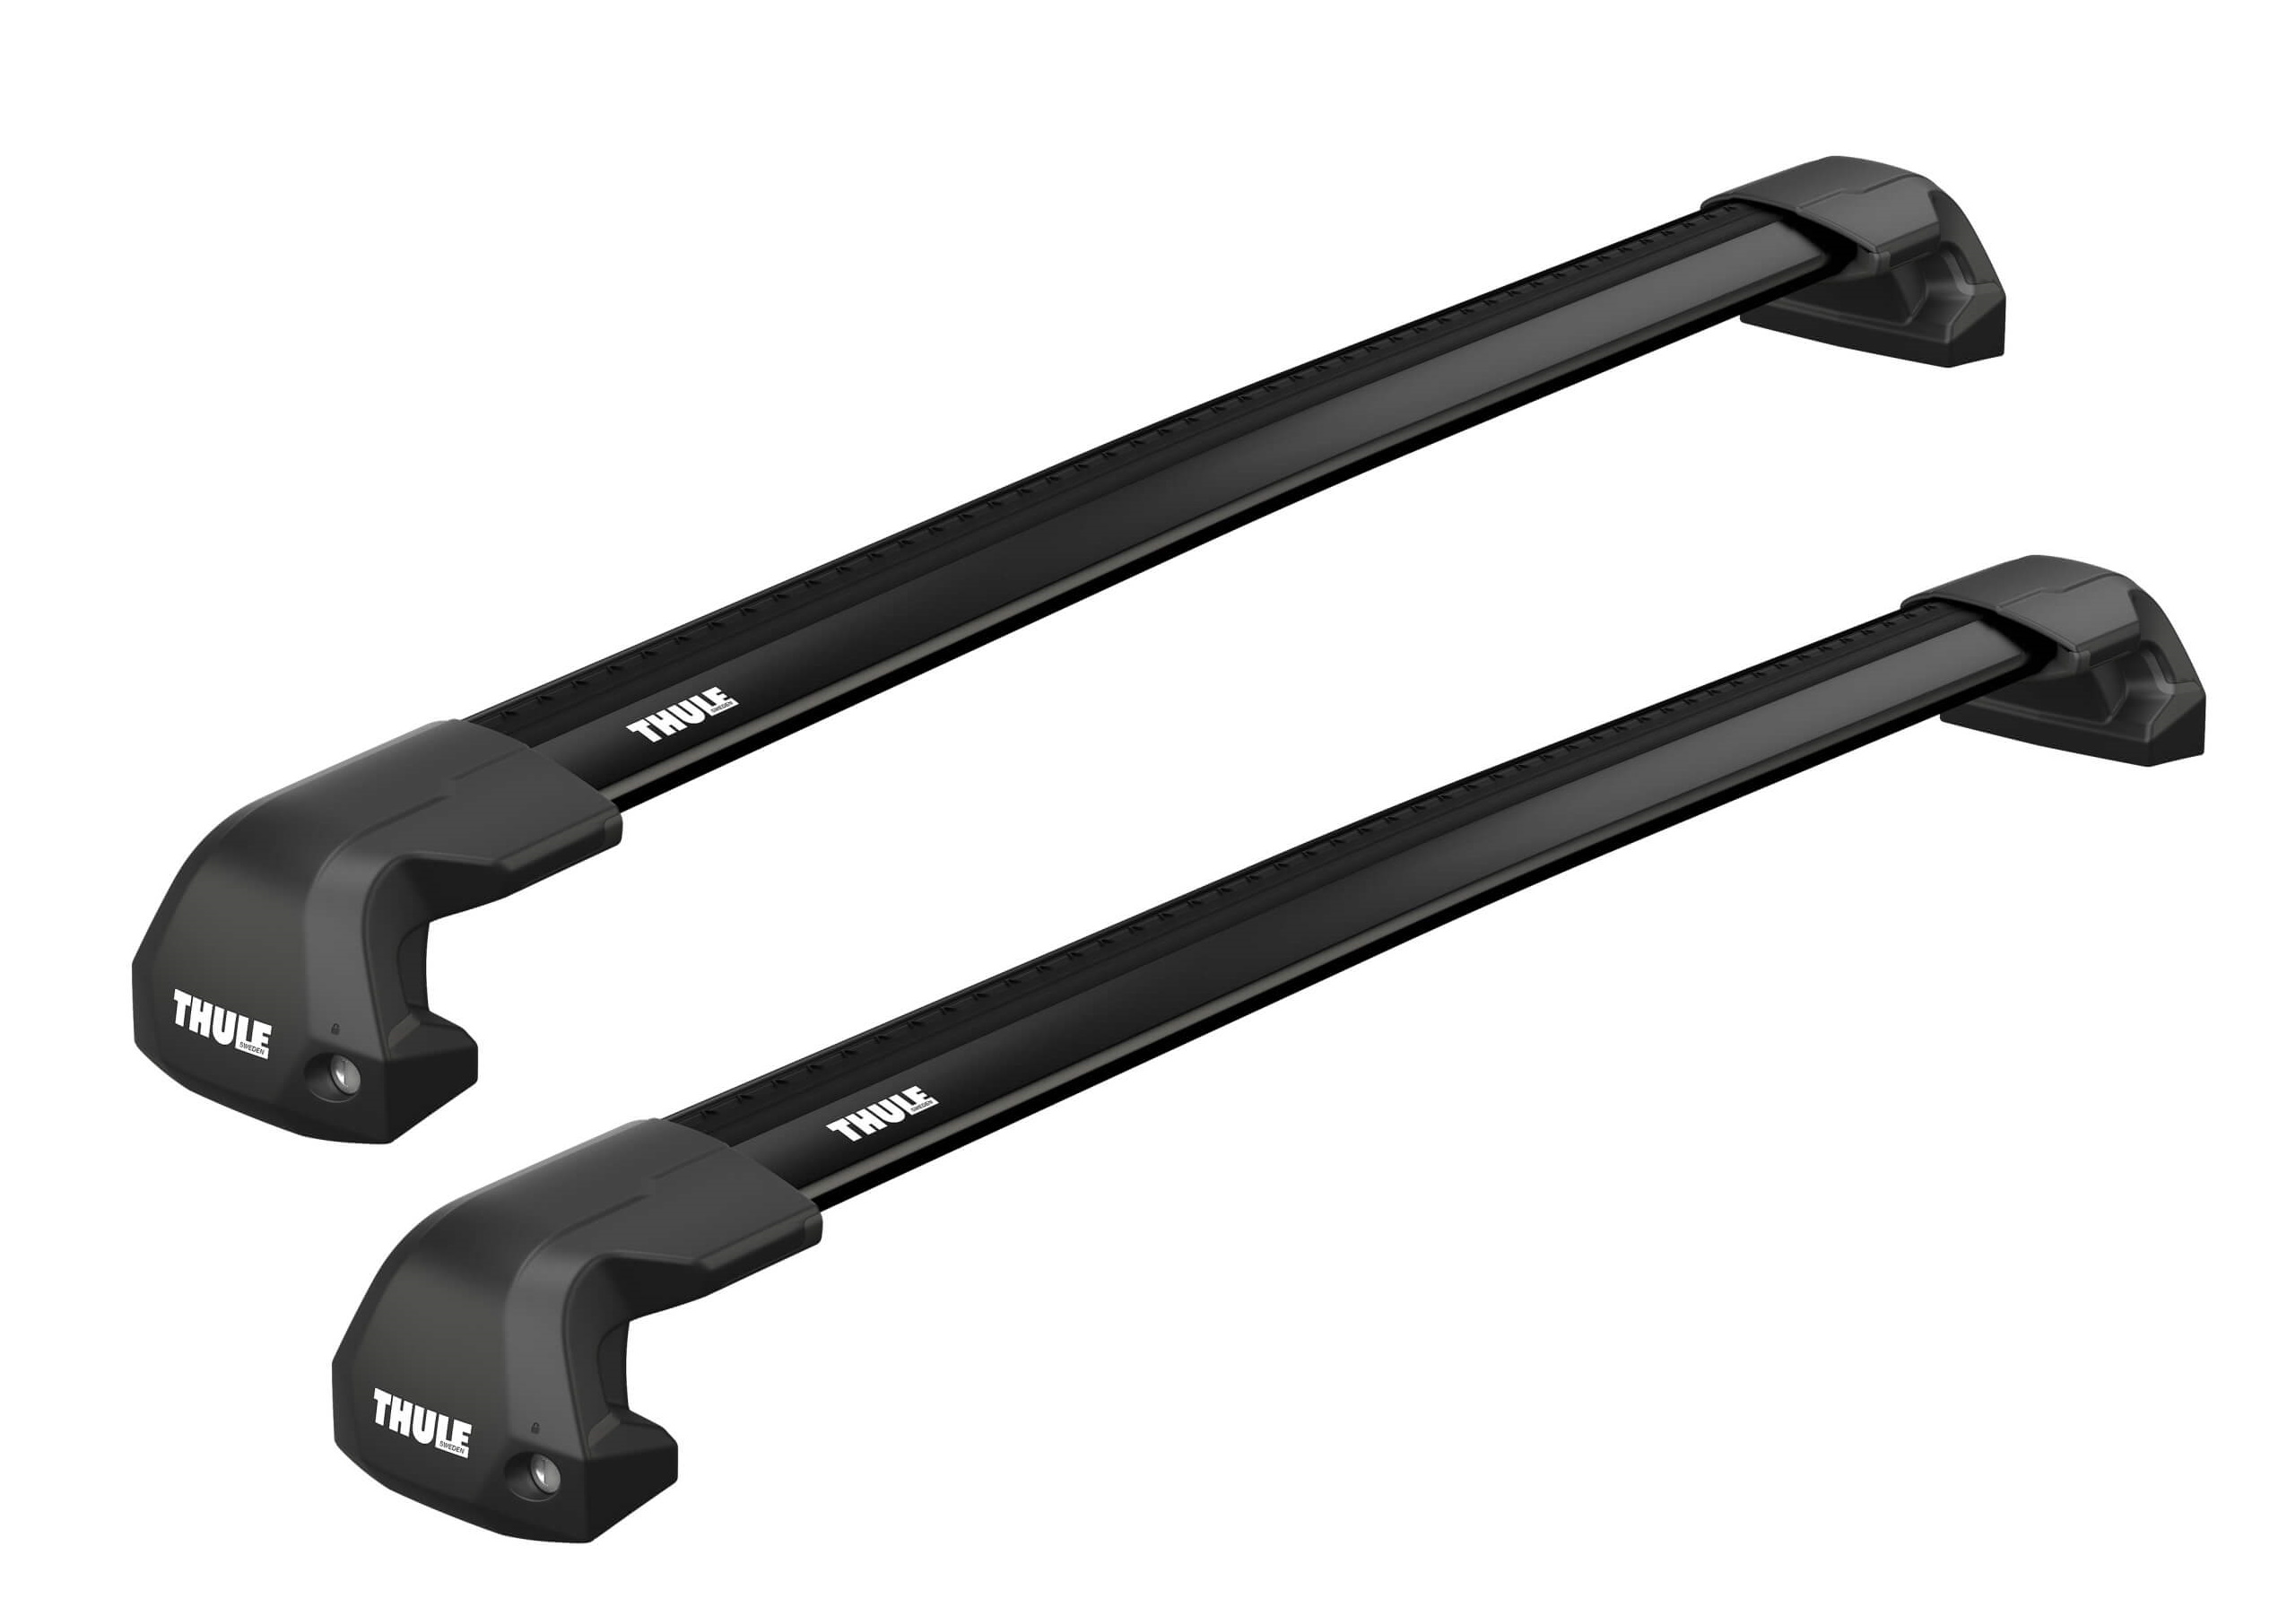 Mercedes Benz CLA coupe (2013 to 2019):Thule Edge black WingBars package - 7207, 7214B x 2, 7115